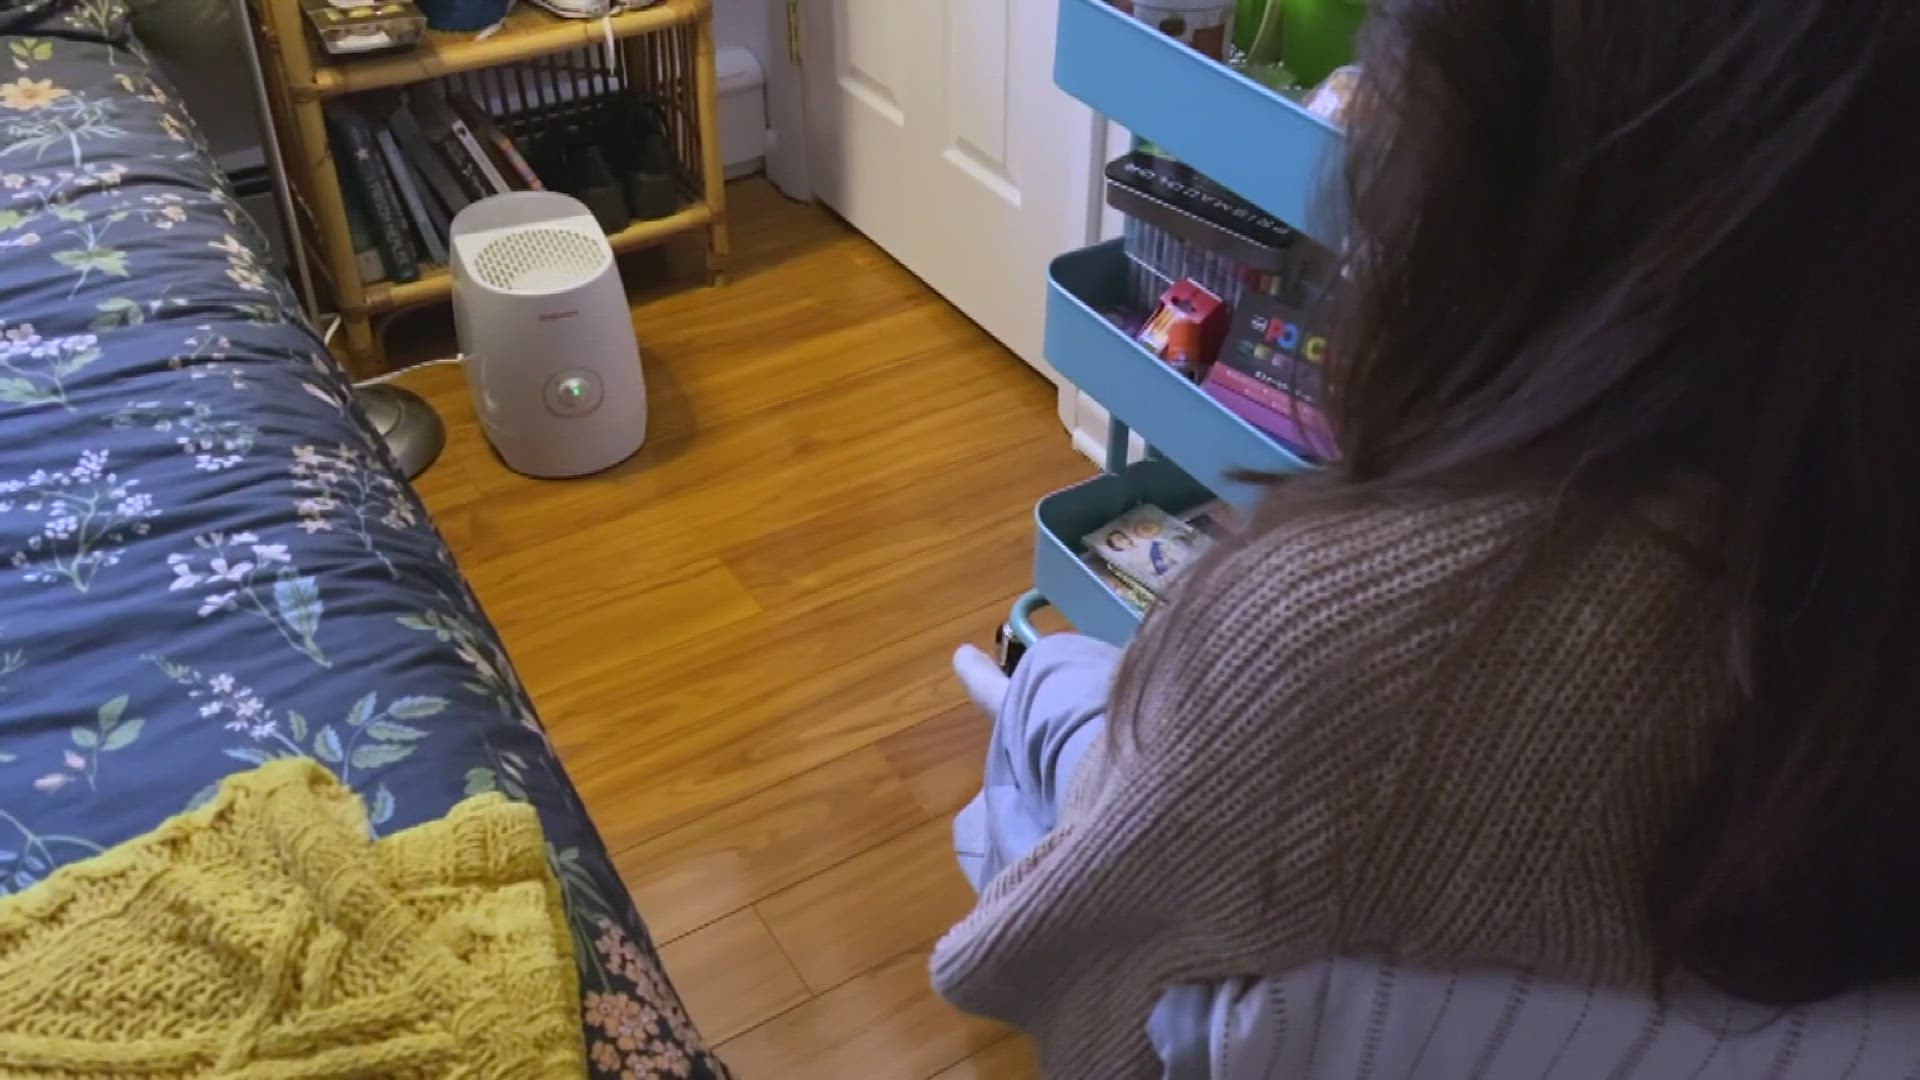 Consumer Reports says adding humidifiers and air purifiers can help with Colorado's dry air but they require some TLC that a lot of people forget about.